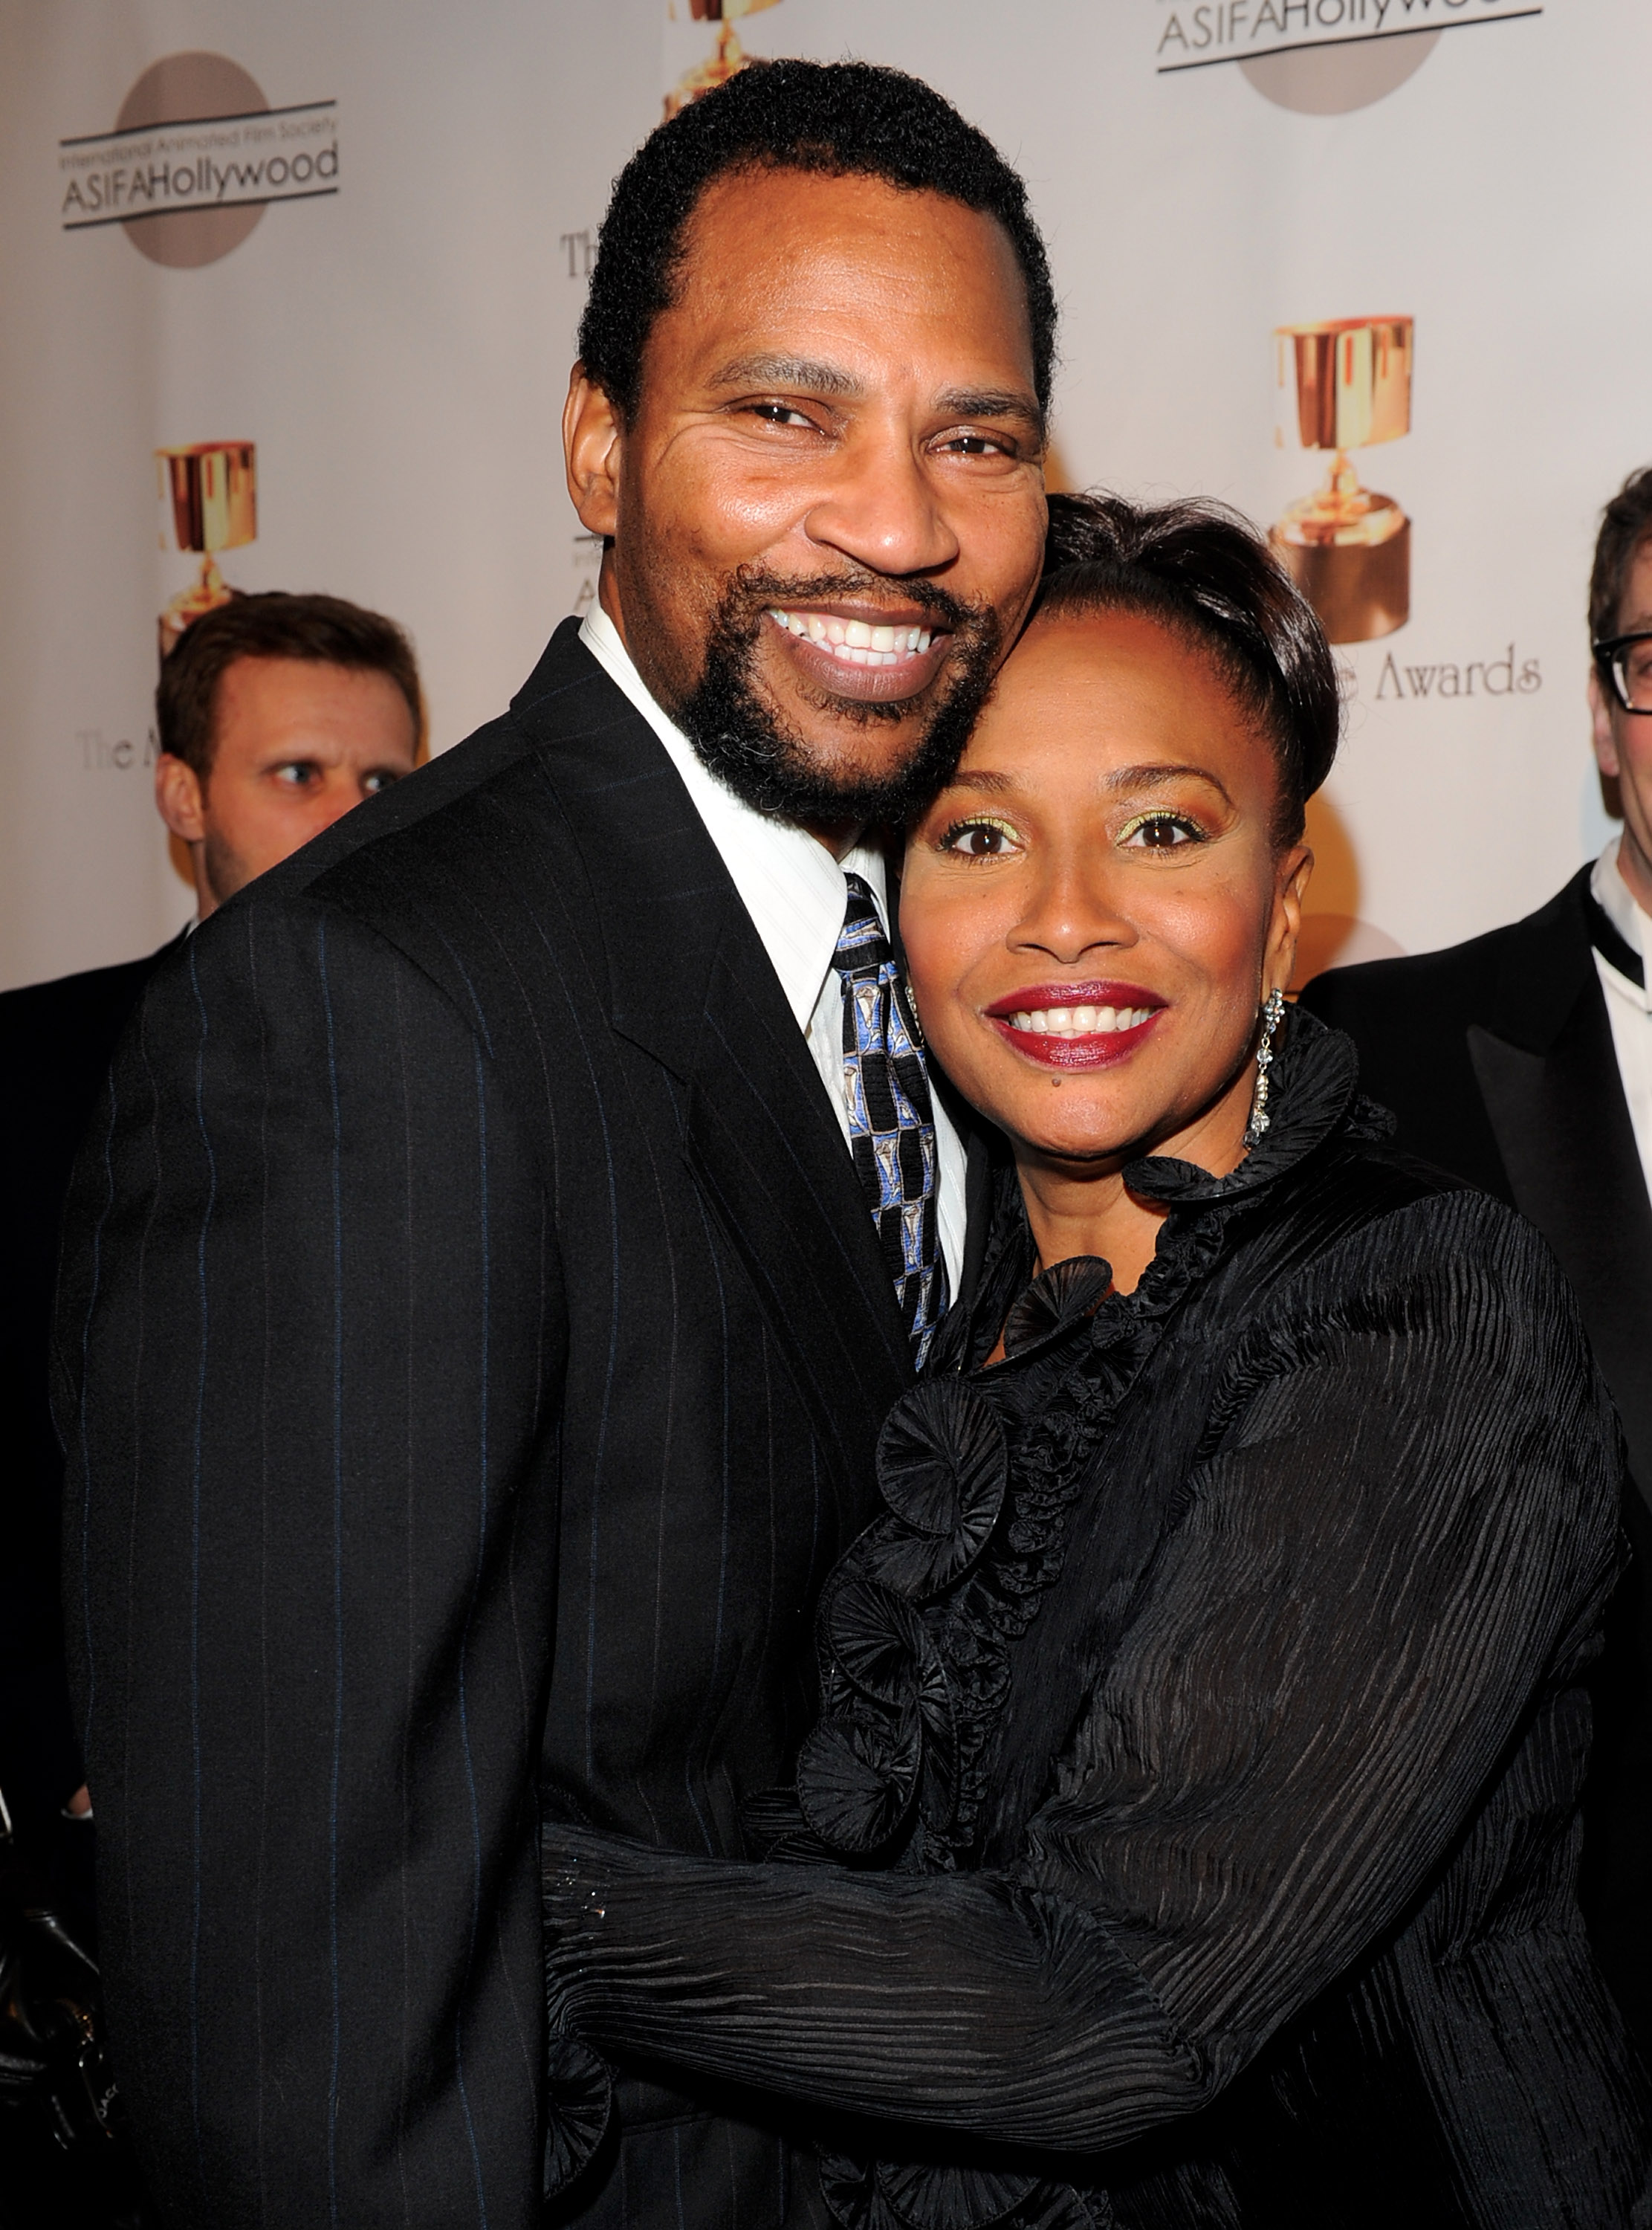 Arnold Byrd and actress Jenifer Lewis at UCLA's Royce Hall on February 6, 2010, in Los Angeles, California. | Source: Getty Images